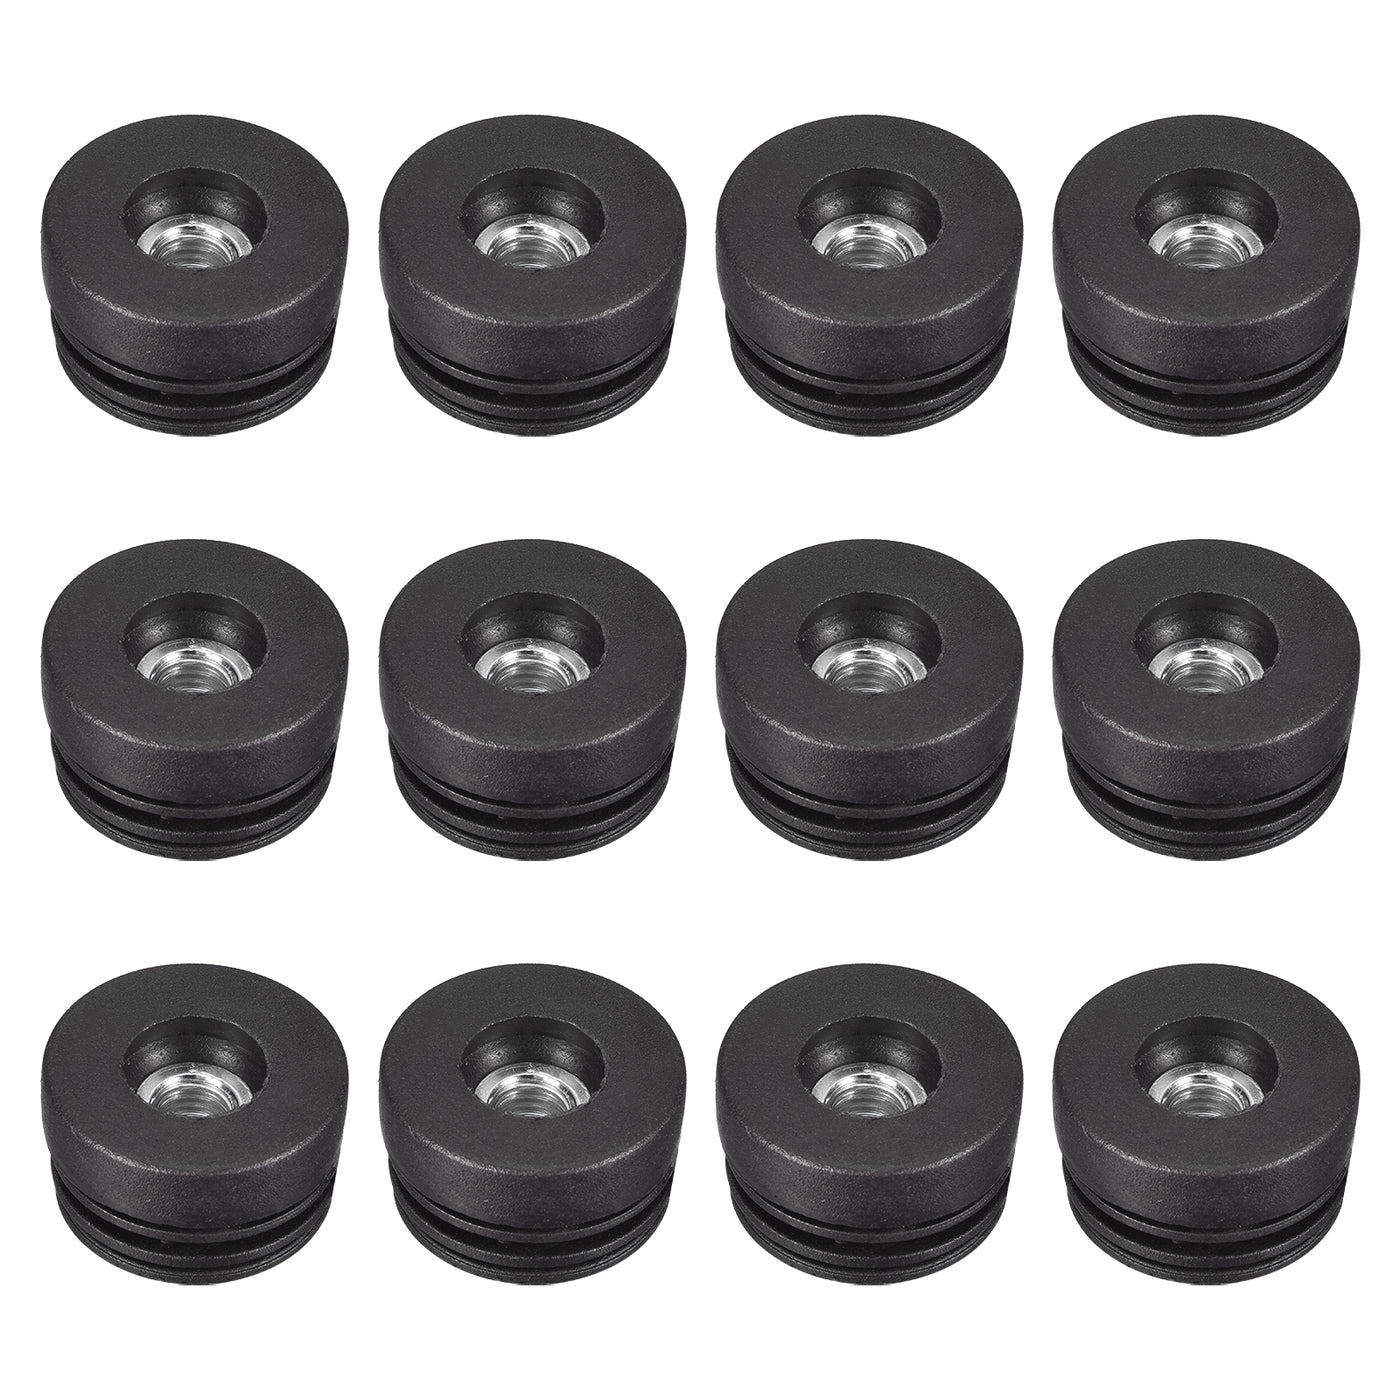 uxcell Uxcell 12Pcs 38mm/1.5" Caster Insert with Thread, Round M10 Thread for Furniture